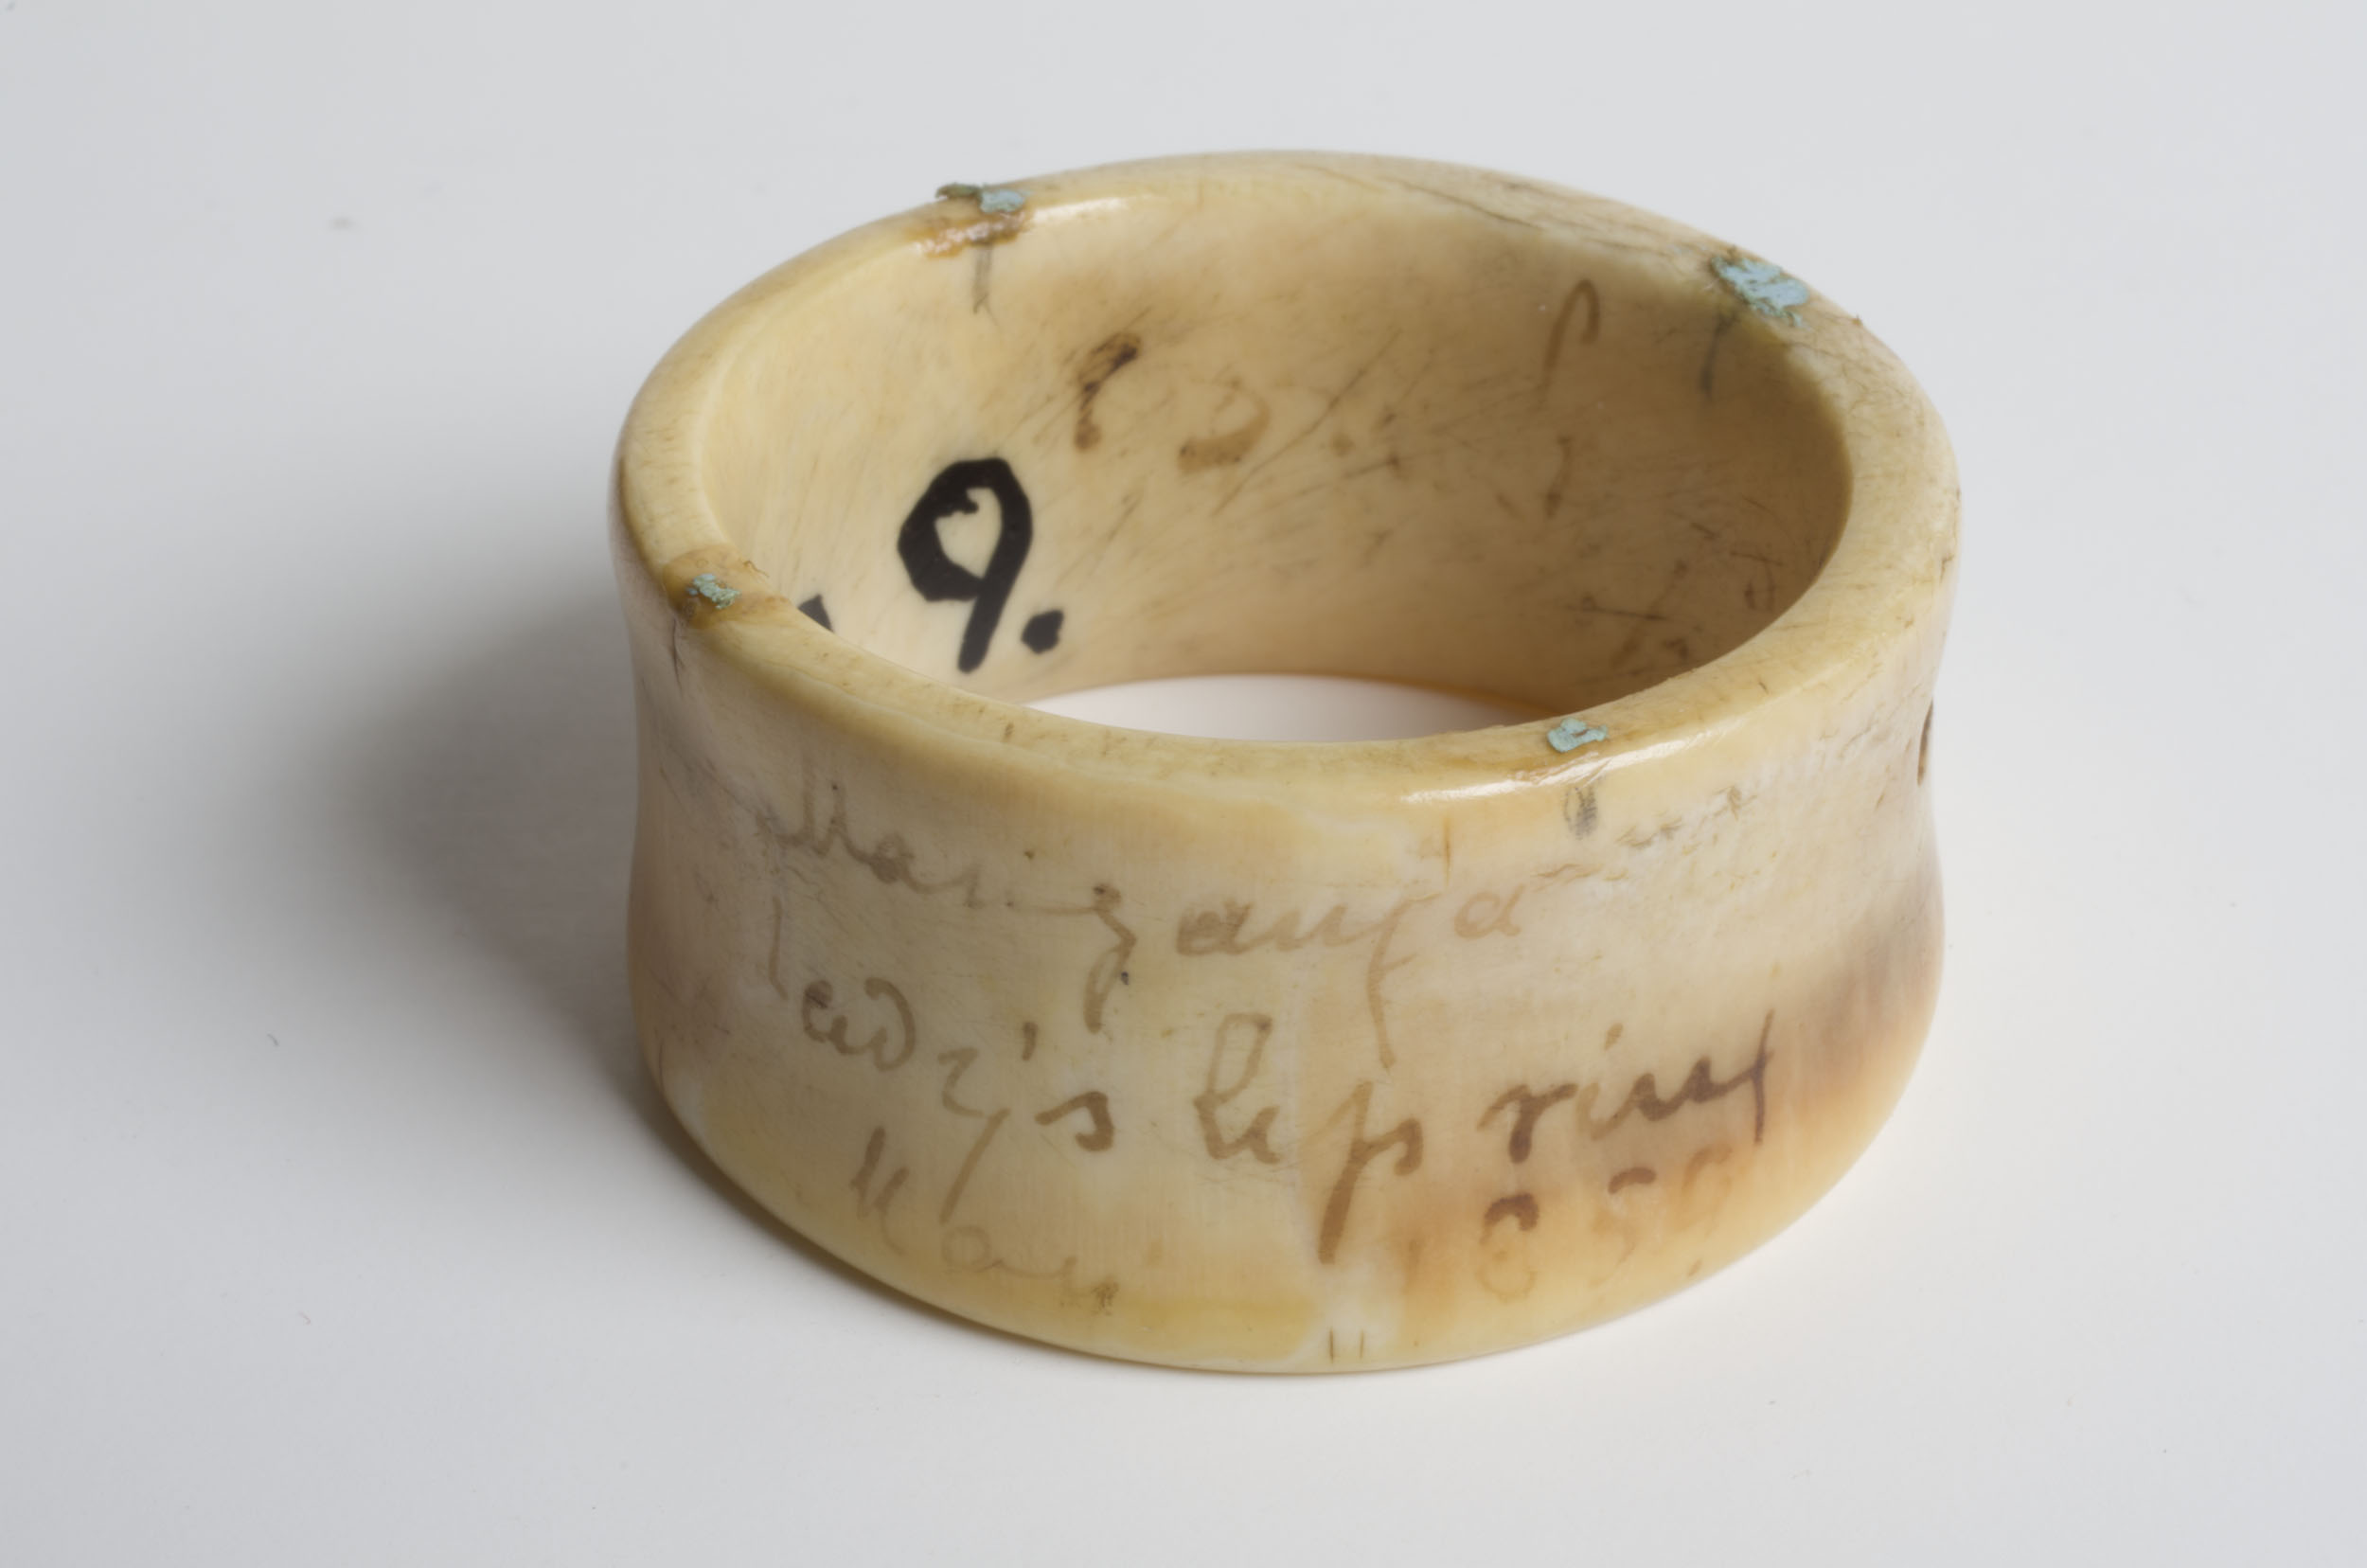 Ivory Lip Ring, May 1859, from the Maganja ethnic group in Africa, with an inscription from David Livingstone. Copyright David Livingstone Centre, Dr. Neil Imray Livingstone Wilson (as relevant), and Roddy Simpson. Creative Commons Attribution-NonCommercial 3.0 Unported (https://creativecommons.org/licenses/by-nc/3.0/)